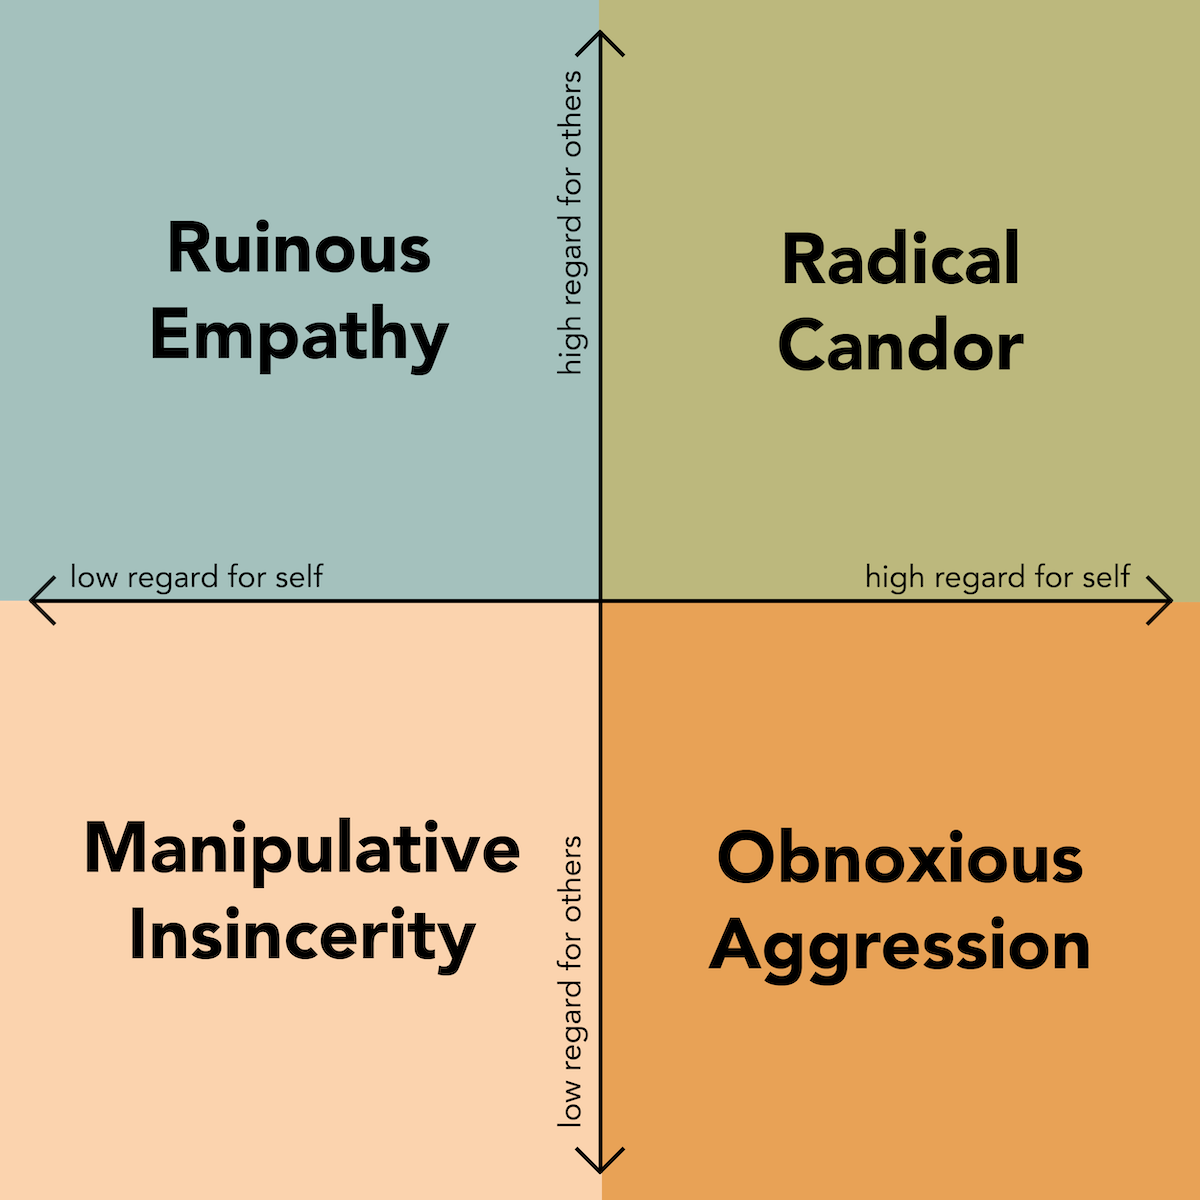 Radical Candor: Balancing Regard for Self and Others — OliveMe Counseling